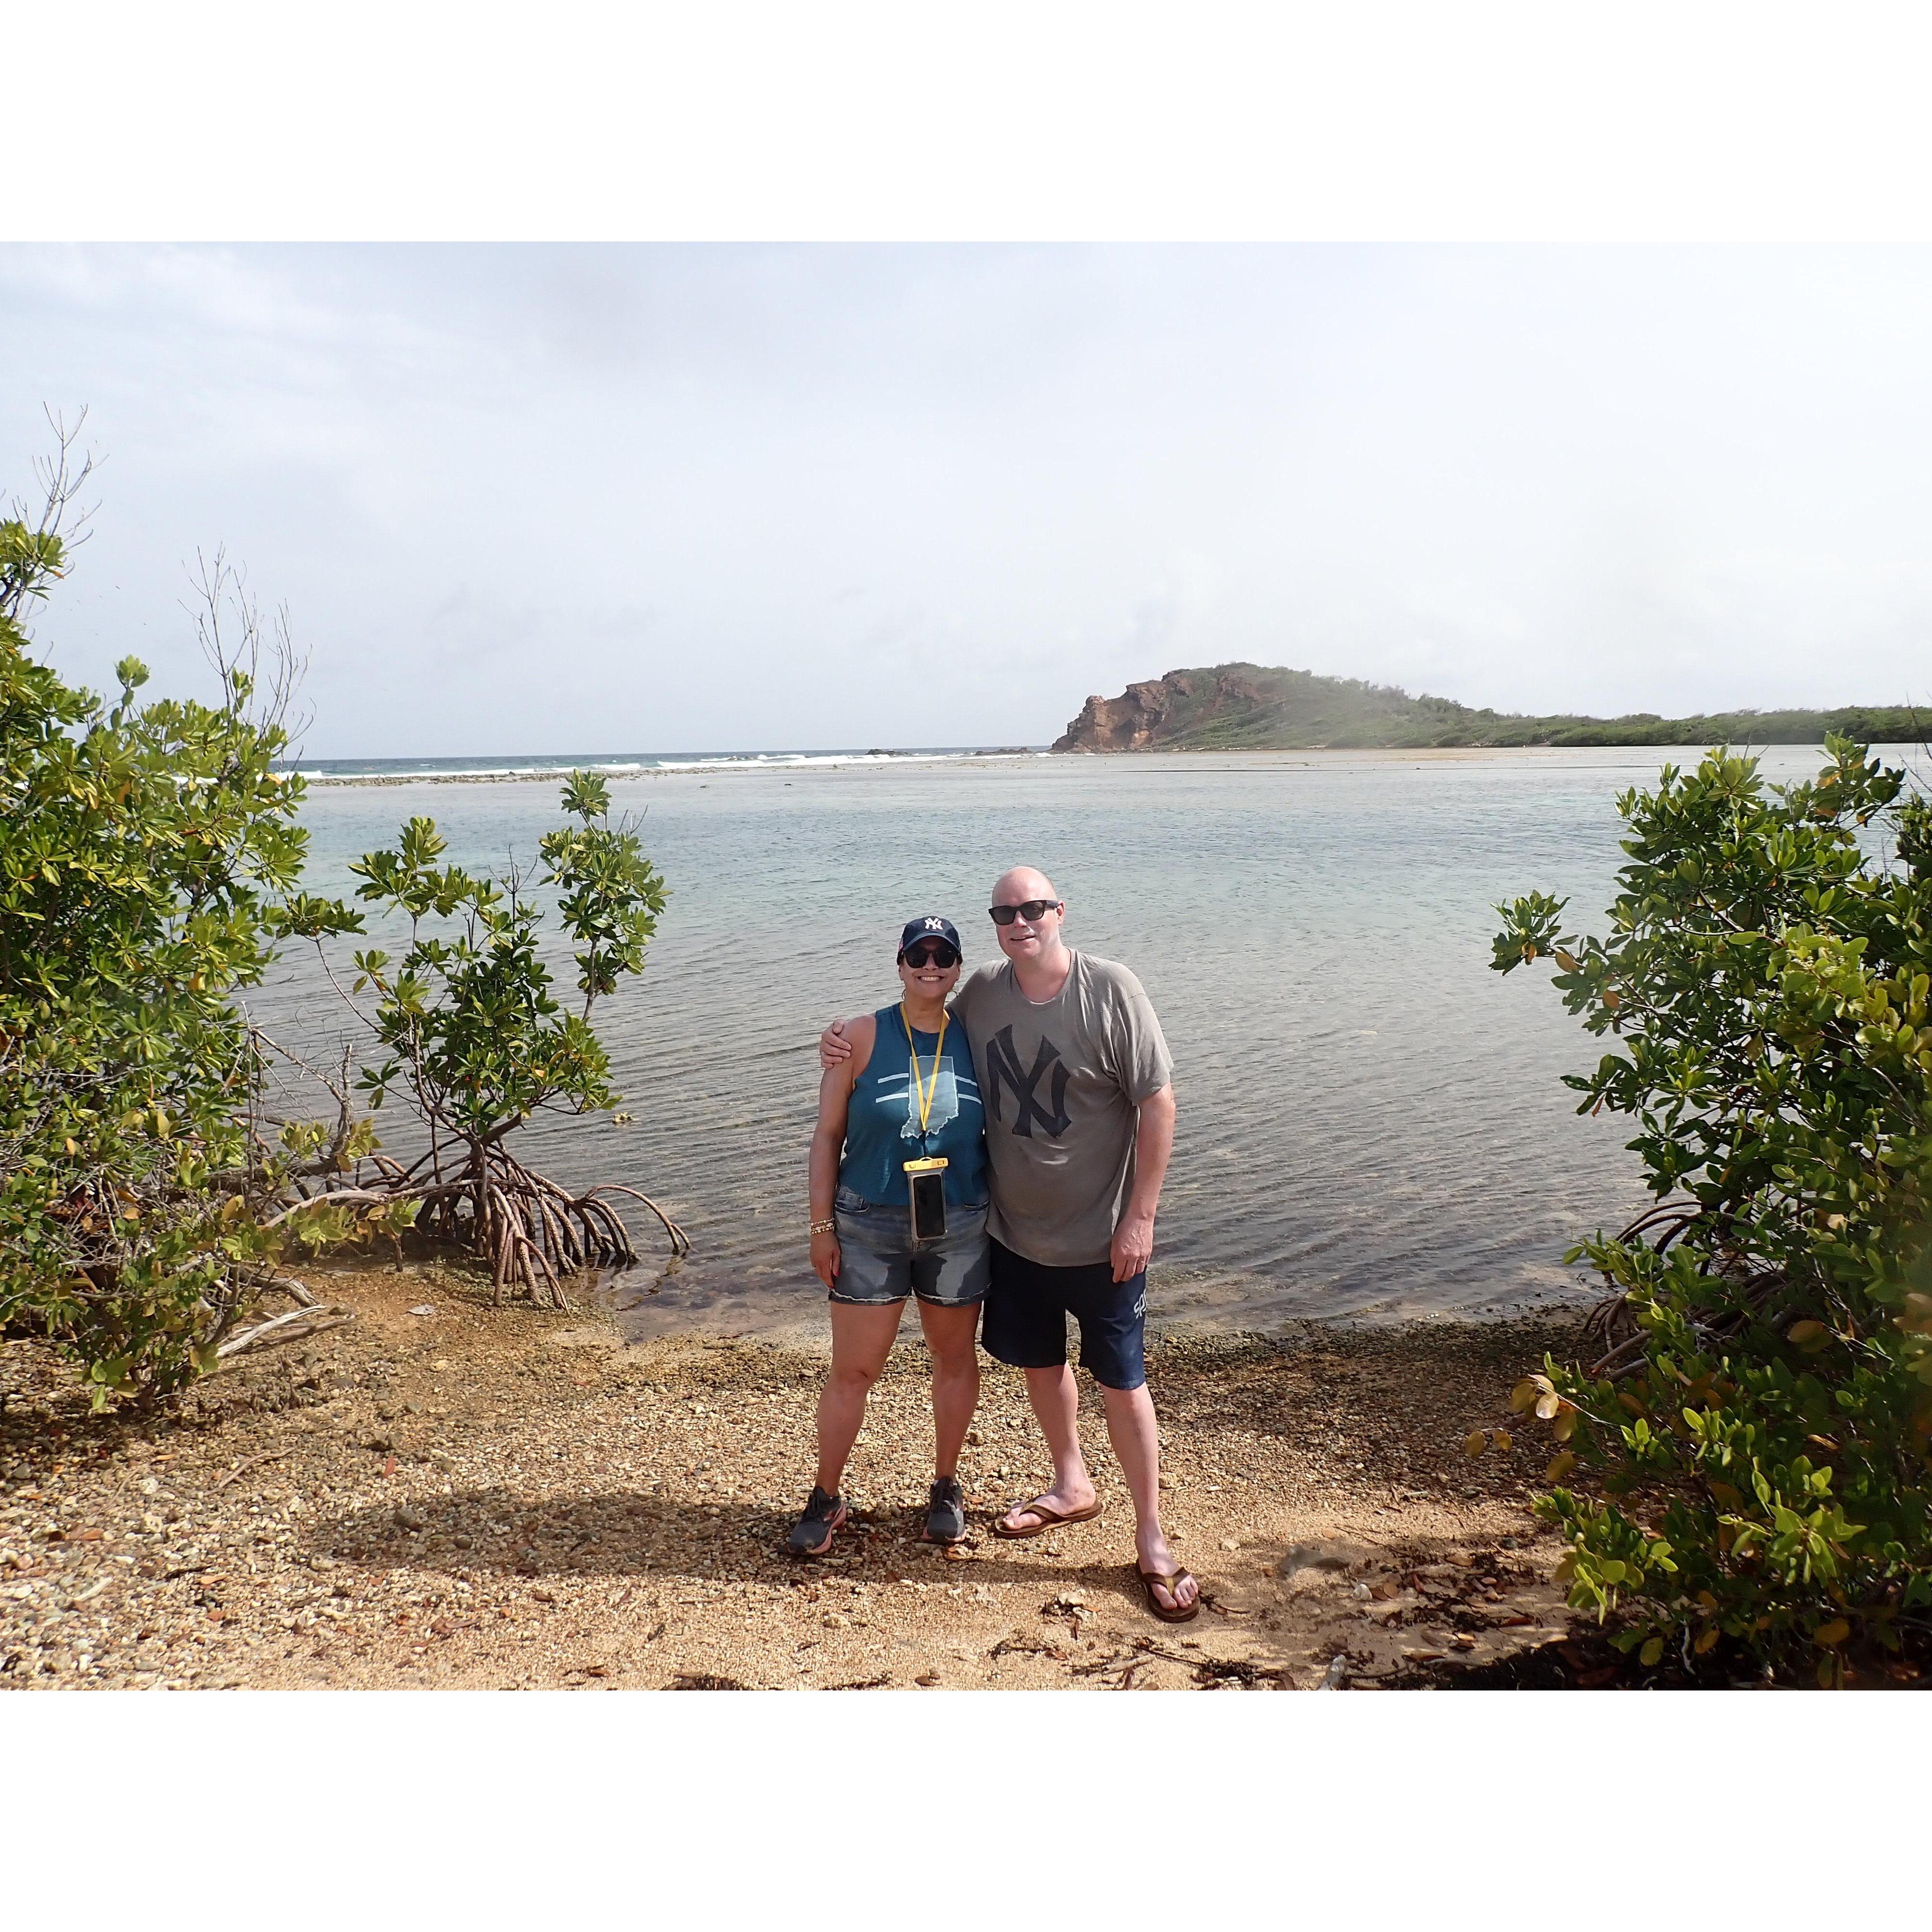 St. Thomas, USVI.  Moments later, we were nearly eaten by a Barracuda.